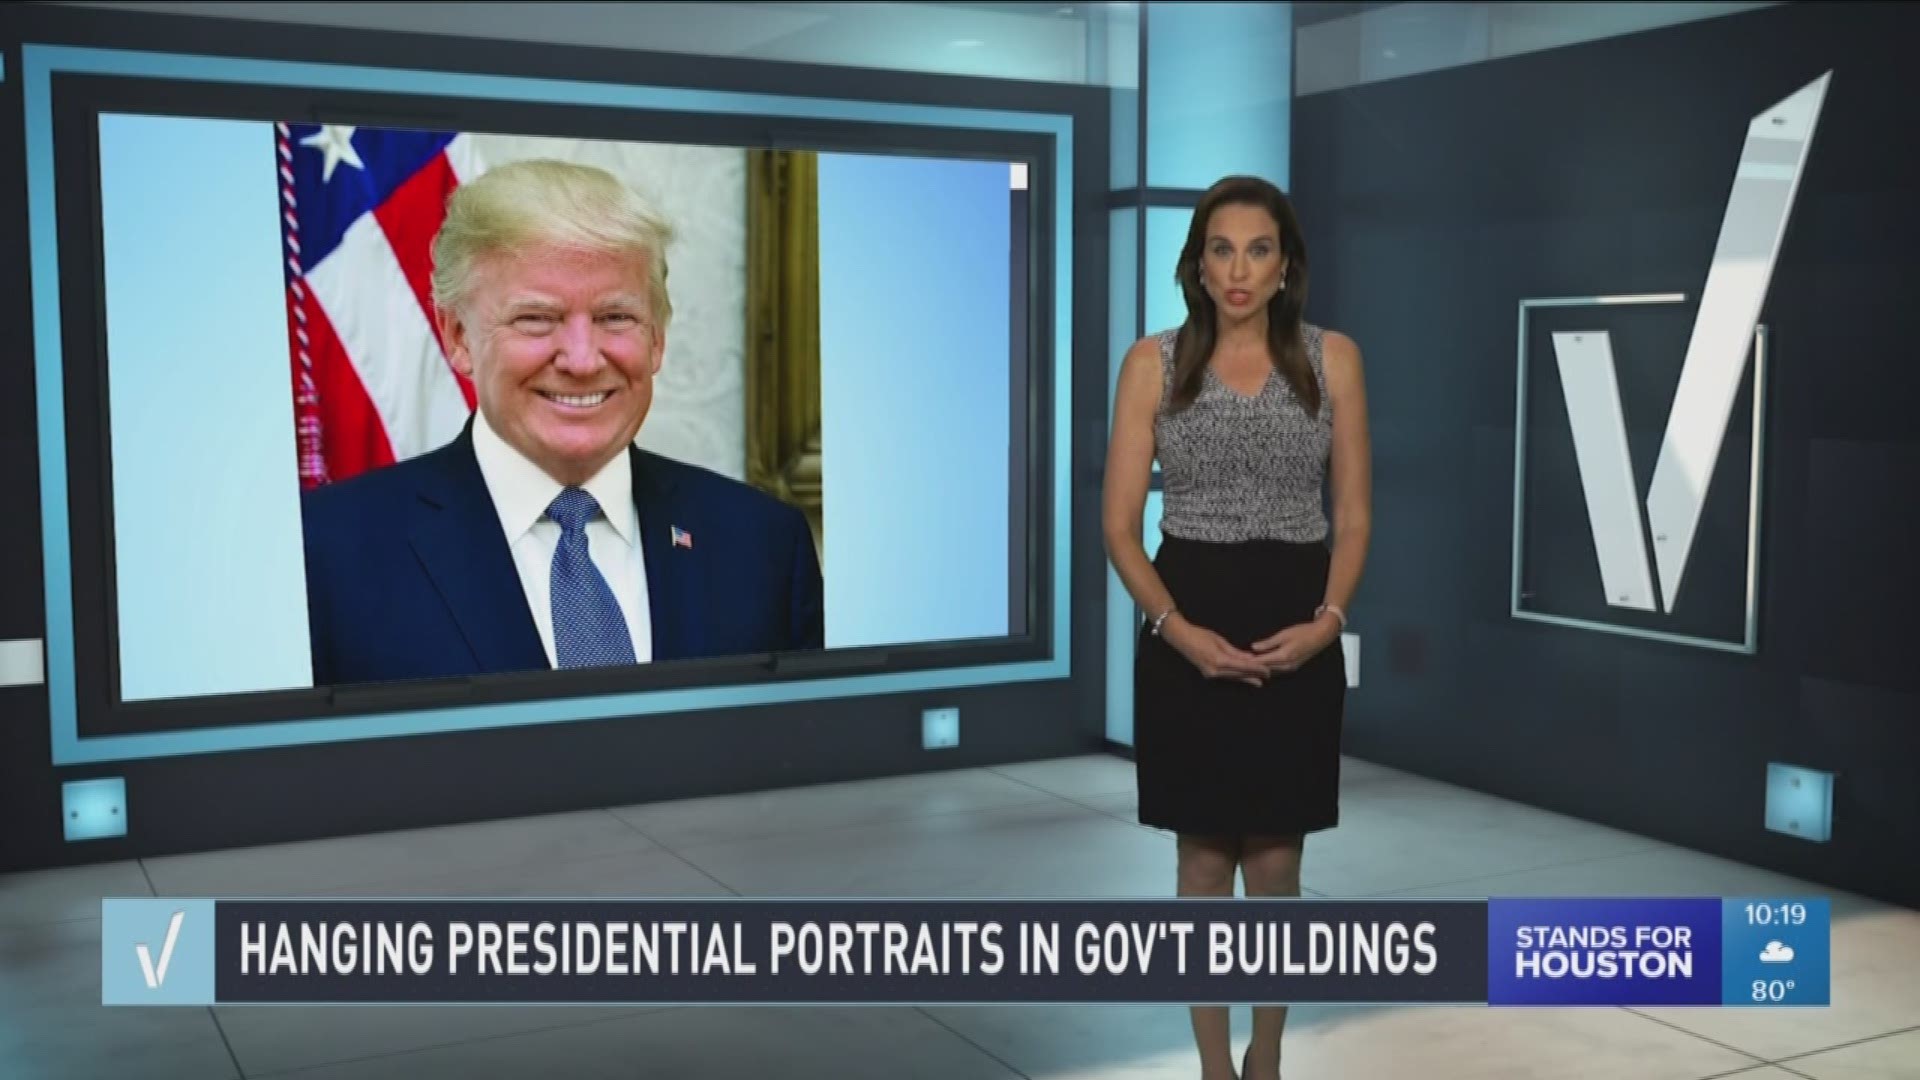 A KHOU 11 viewer via email wanted us to verify: "Do government agencies have to display a picture of the 'current' president on their walls?"